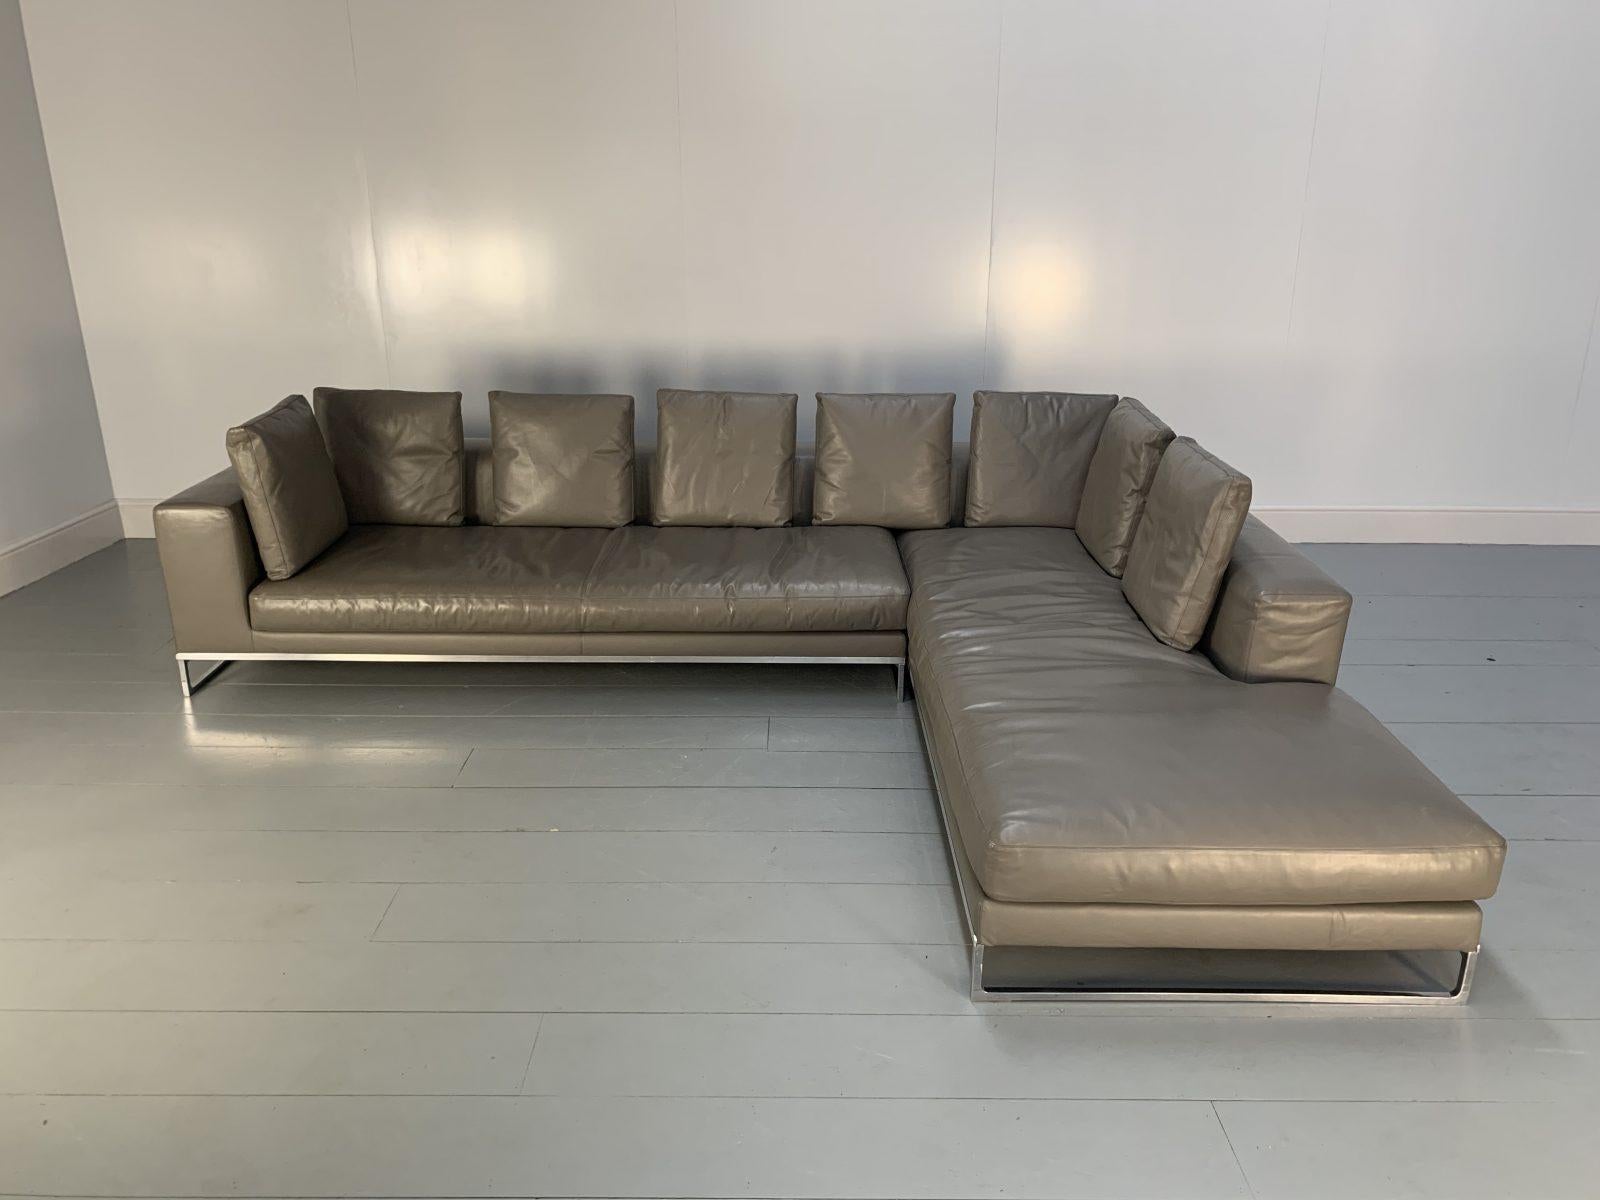 This is a large, iconic “Dadone” L-Shape Sectional Sofa from the “Maxalto” range of seating from the world renown Italian furniture house of B&B Italia.
 
In a world of temporary pleasures, B&B Italia create beautiful furniture that remains a joy